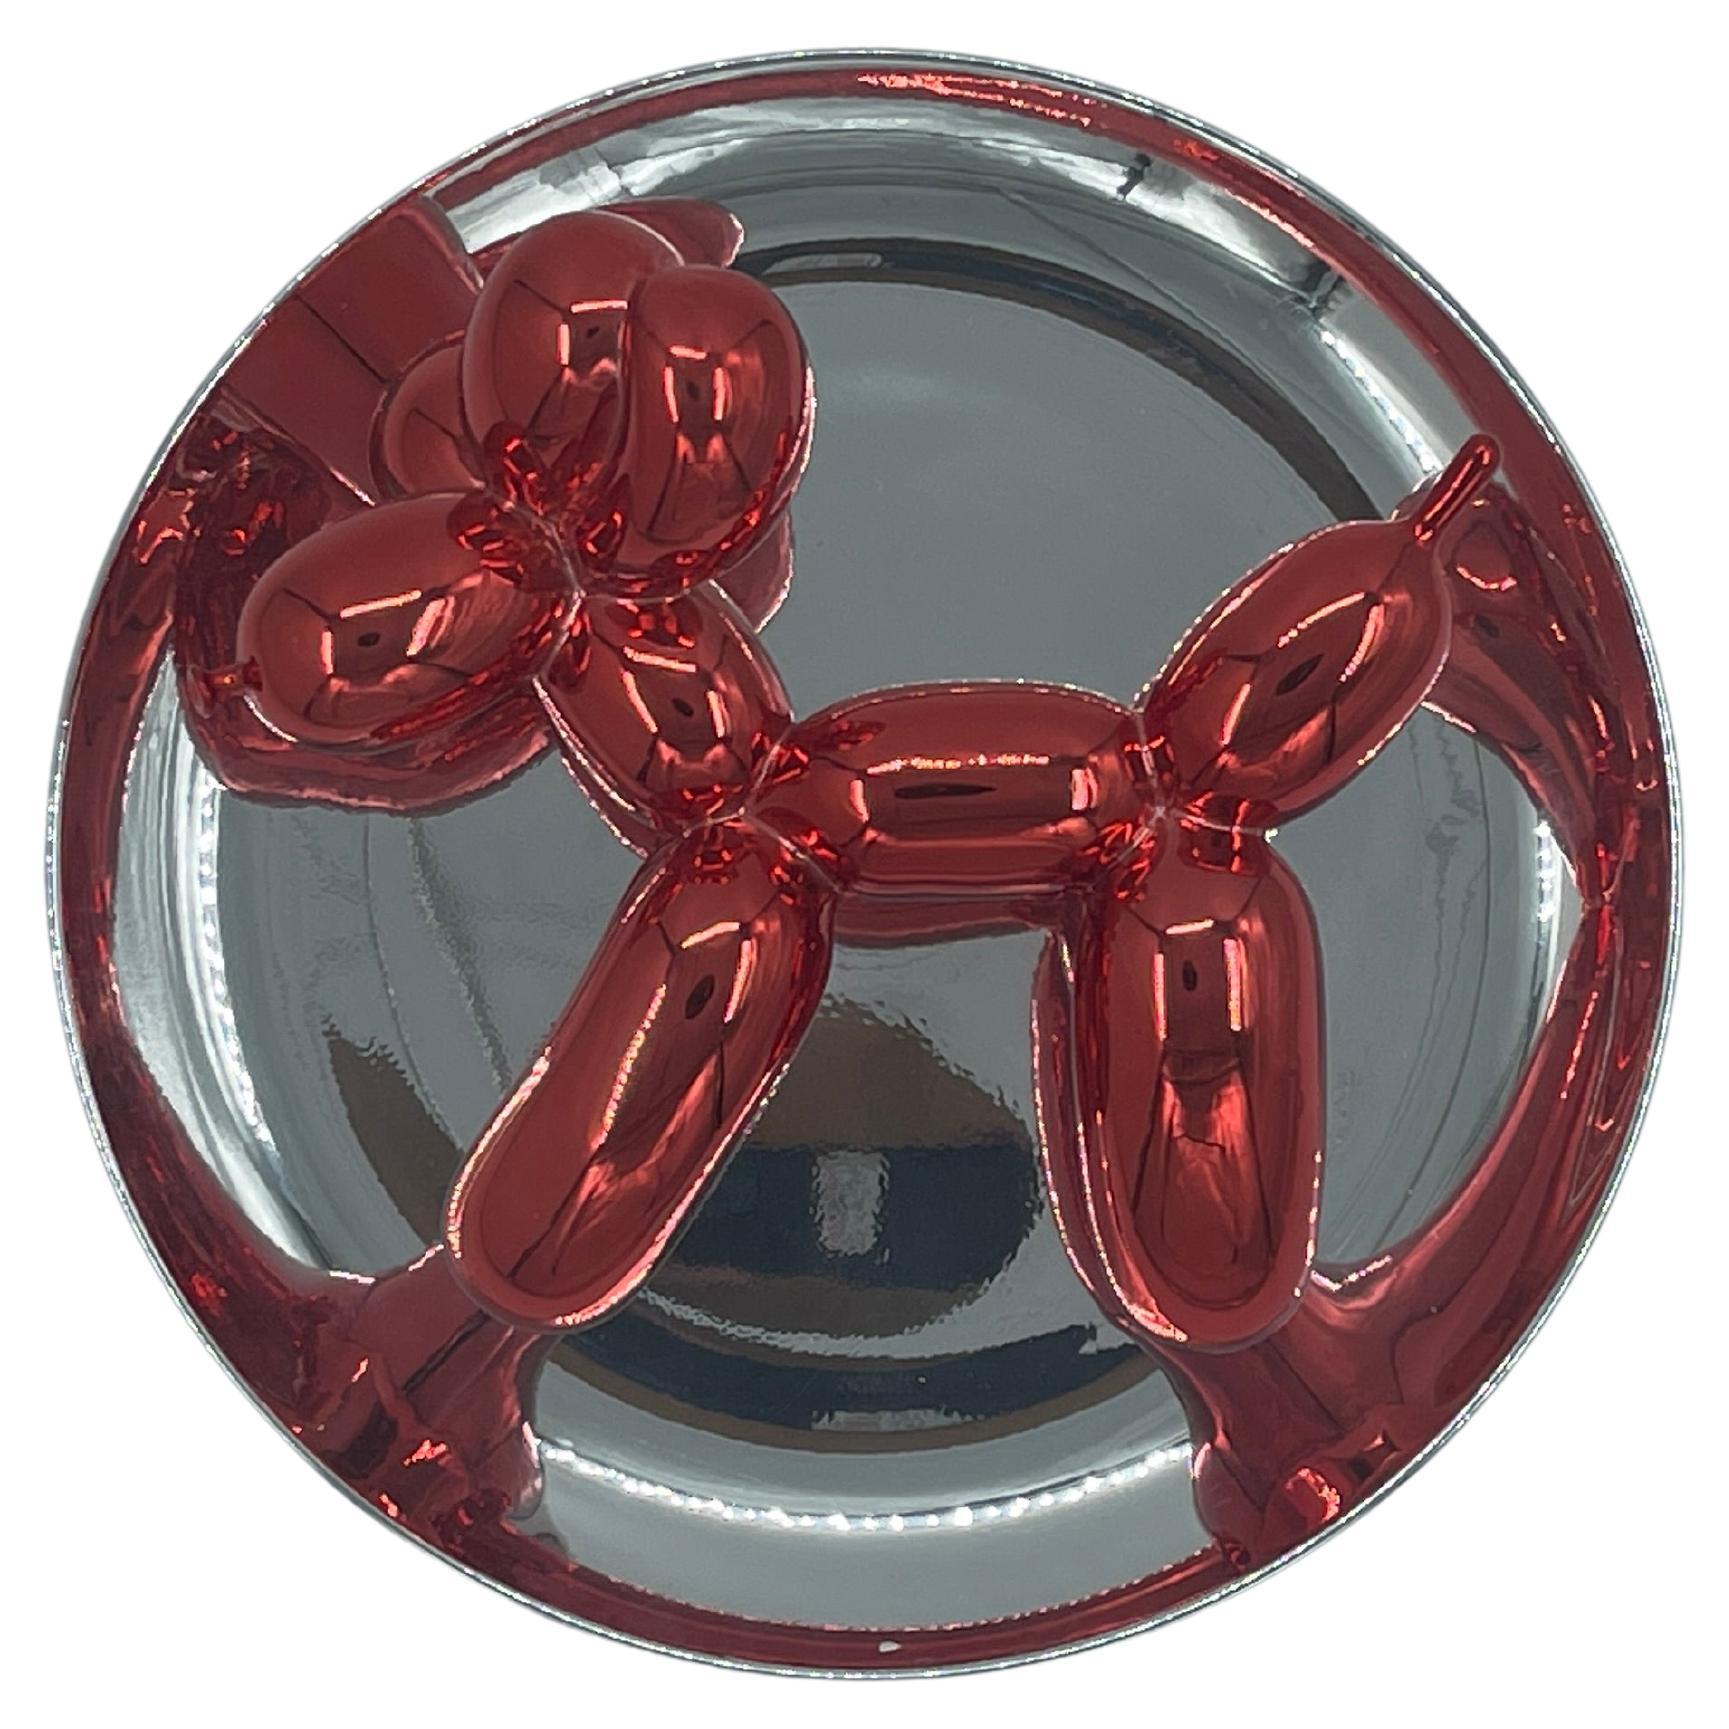 Jeff Koons 'Balloon Dog' (Red) 1995 For Sale